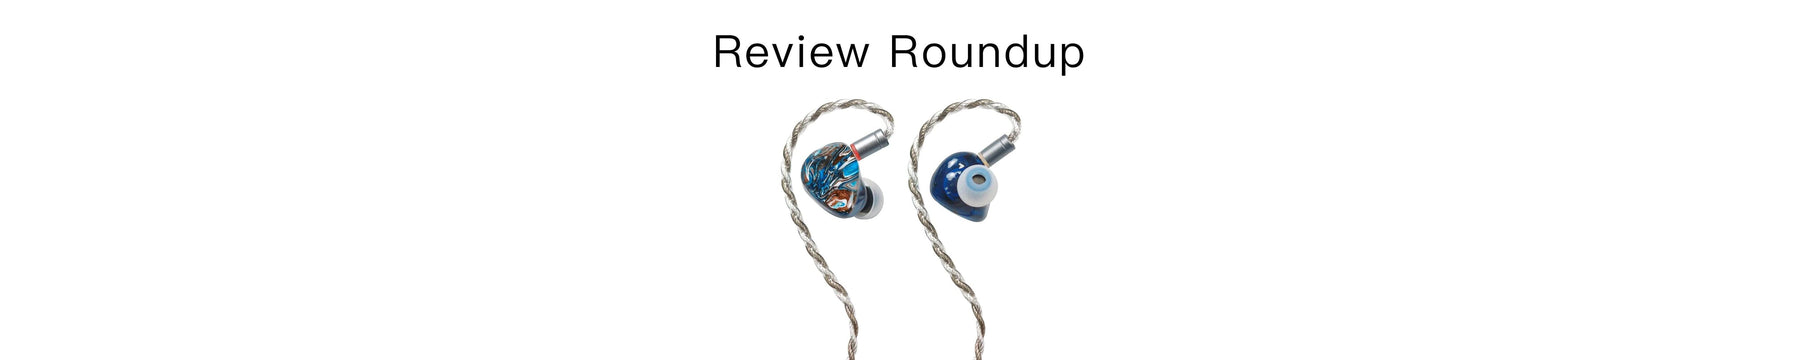 Letshuoer x Gizaudio Galileo Review Roundup: Beautiful Dual-Driver Hybrid IEM Which Is Loved By Many!!